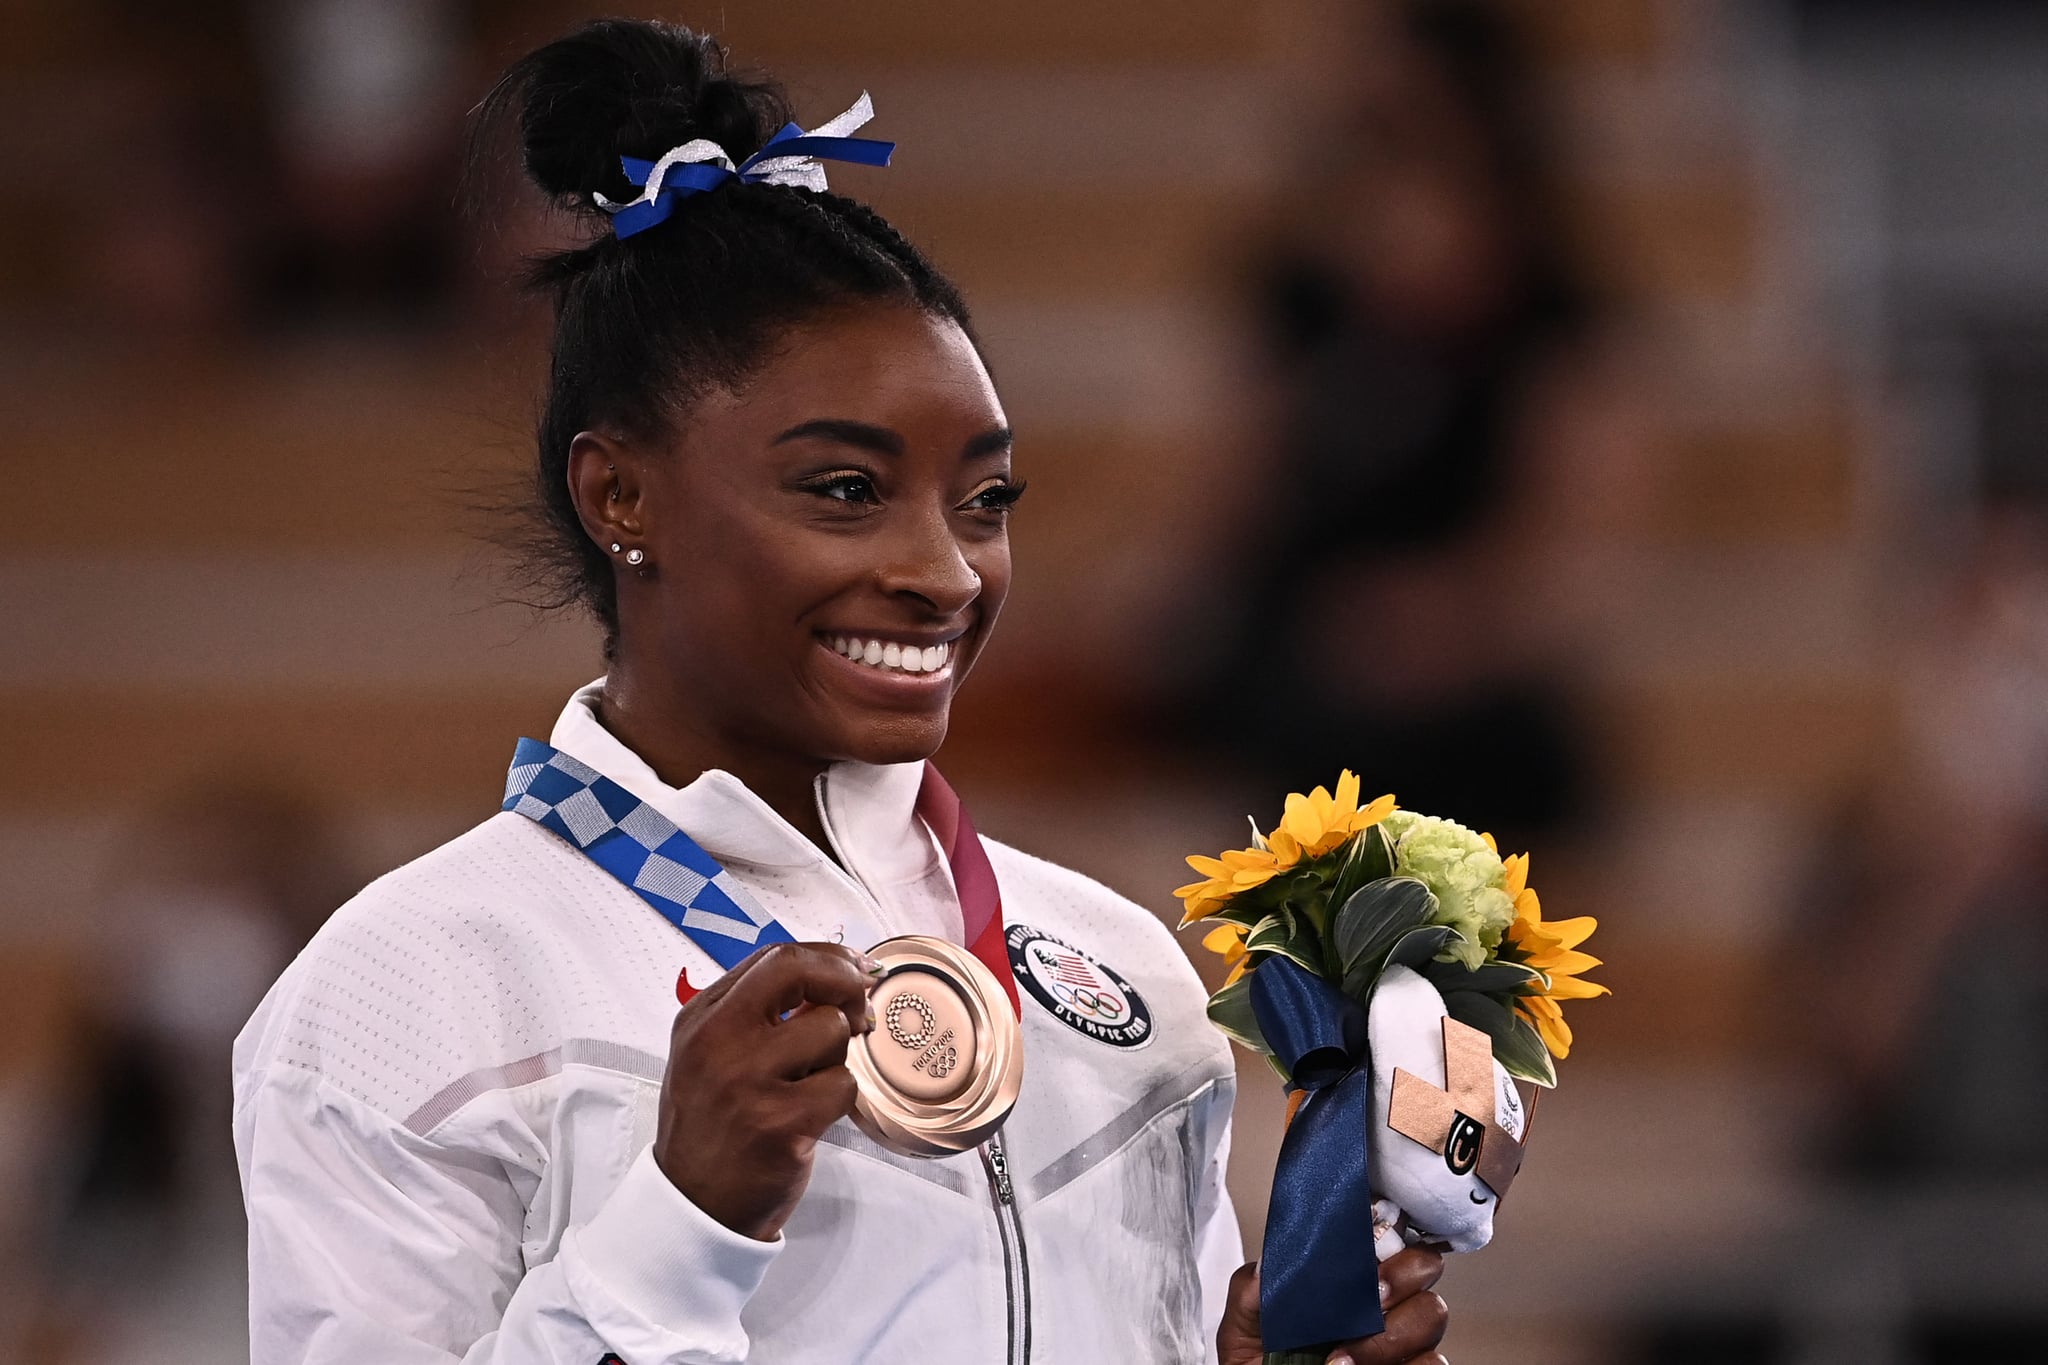 USA's Simone Biles poses with her bronze medal during the podium ceremony of the artistic gymnastics women's balance beam of the Tokyo 2020 Olympic Games at Ariake Gymnastics Centre in Tokyo on August 3, 2021. (Photo by Lionel BONAVENTURE / AFP) (Photo by LIONEL BONAVENTURE/AFP via Getty Images)